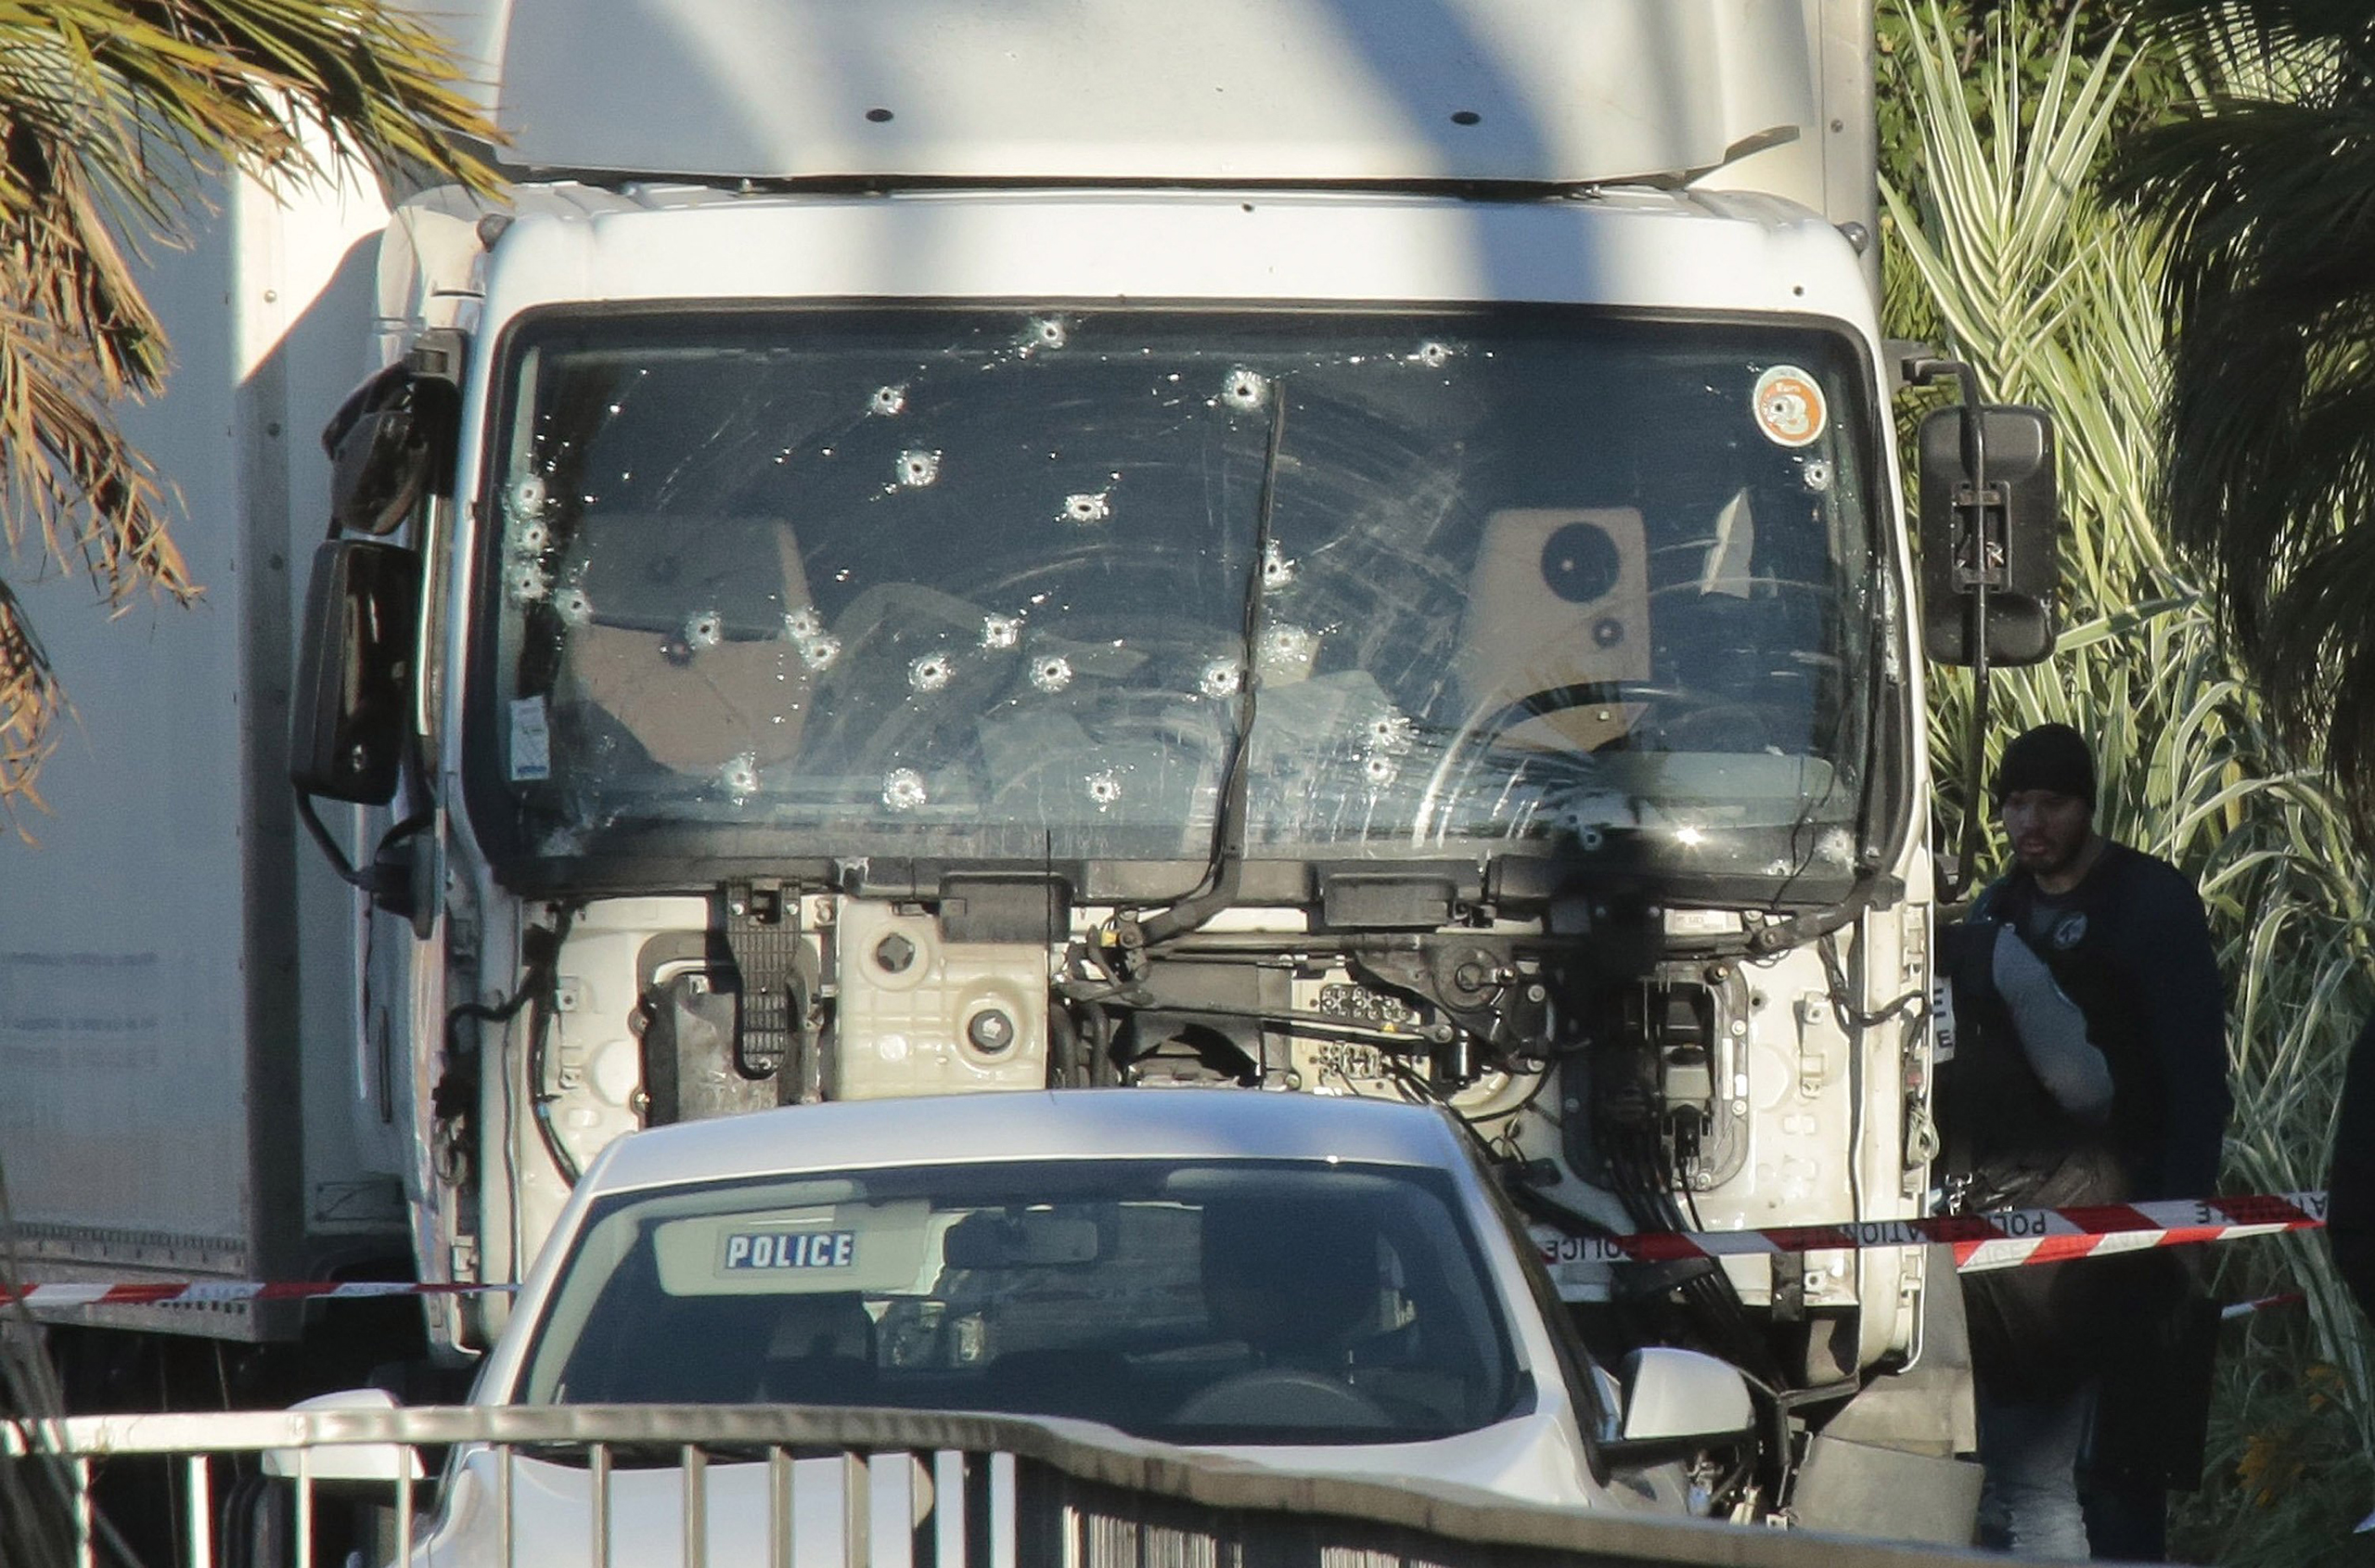 Forensic police investigate the truck at the scene of the terror attack on the Promenade des Anglais in Nice, France, on July 15, 2016. Authorities said a French-Tunisian attacker killed 84 people as he drove a truck through crowds, gathered to watch a firework display during Bastille Day celebrations. The attacker then opened fire on people in the crowd before being shot dead by police. Patrick Aventurier—Getty Images (Patrick Aventurier—Getty Images)